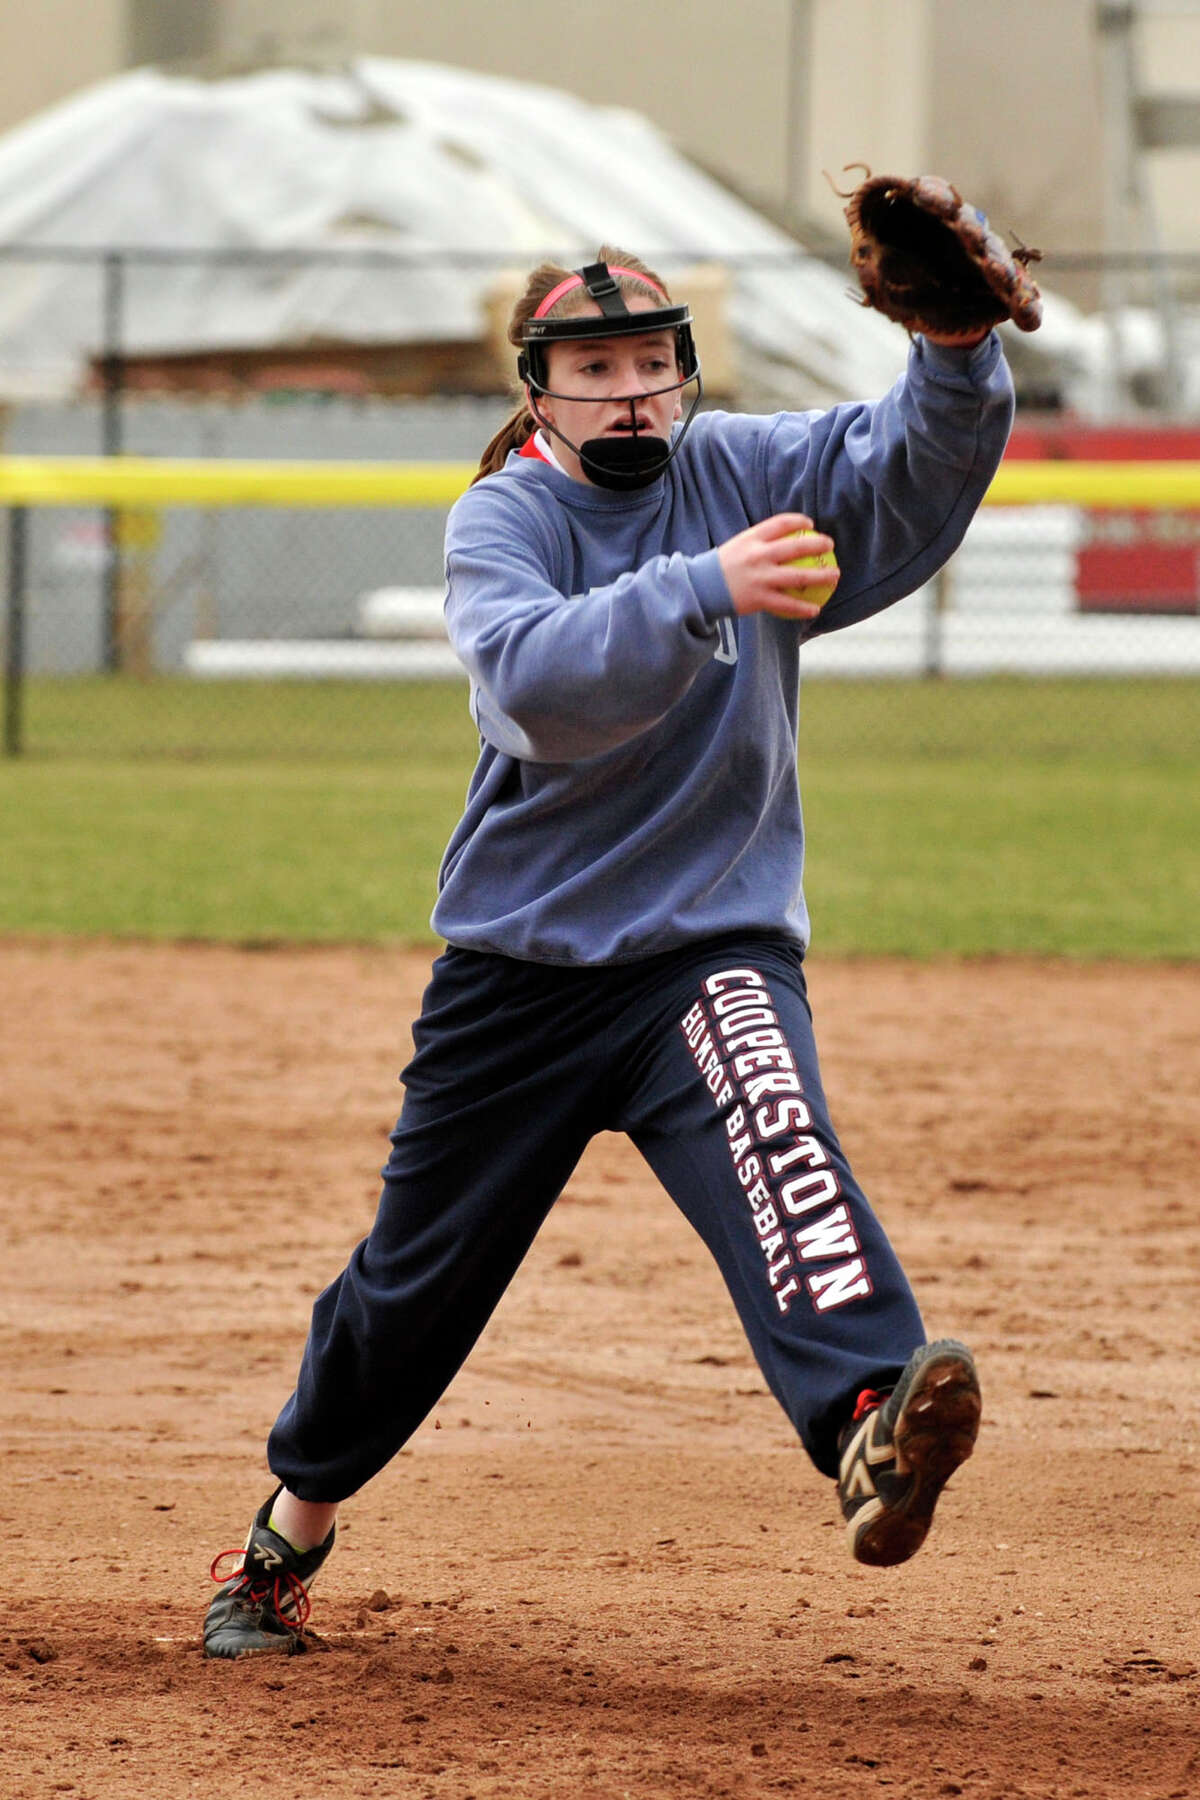 Katie Piro pitches during softball practice at Greenwich High School in Greenwich, Conn., on Monday, April 7, 2014.